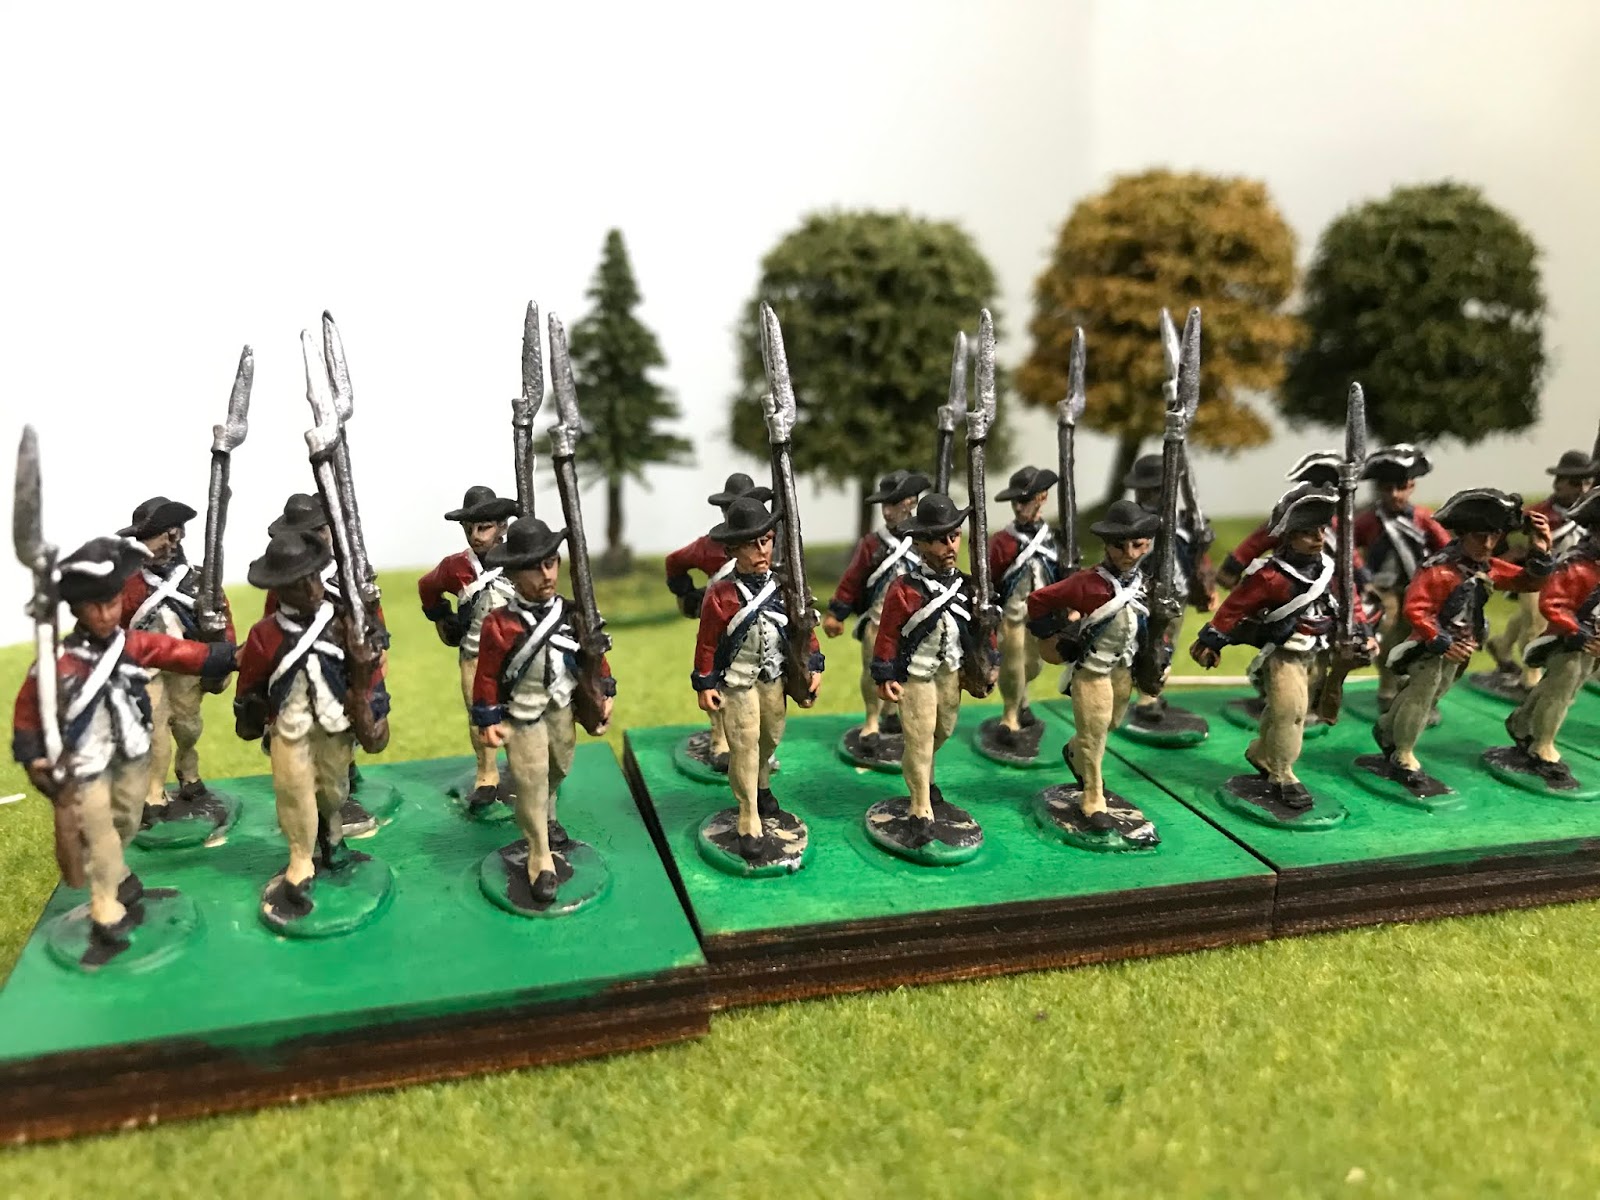 My Brave Fusiliers!: June 2020